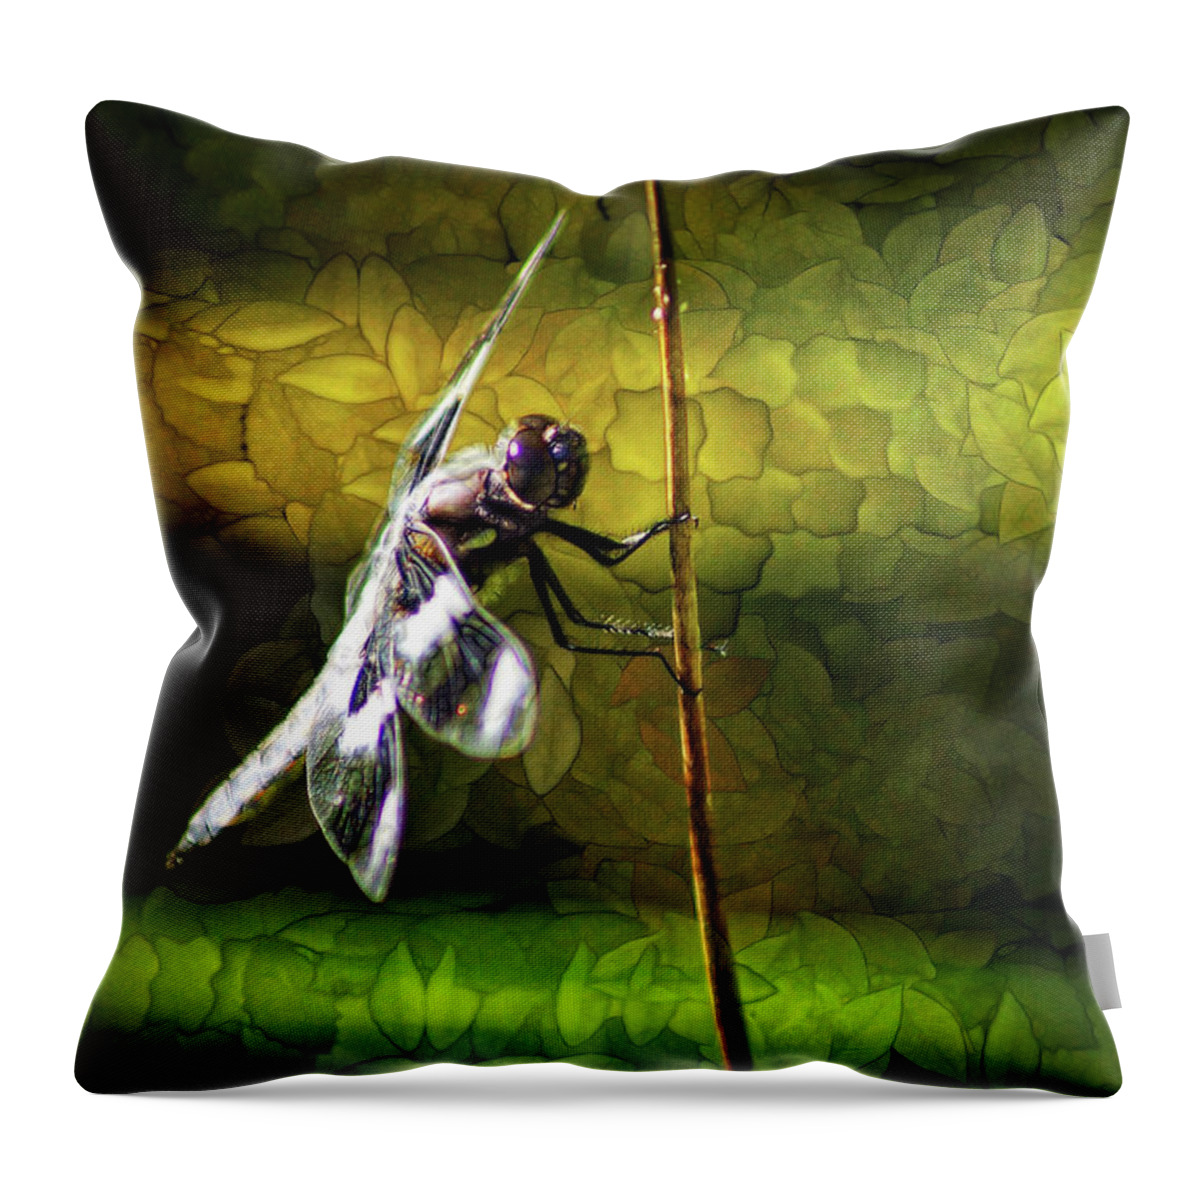 Dragonfly Throw Pillow featuring the photograph Keeping An Eye On You by Cameron Wood